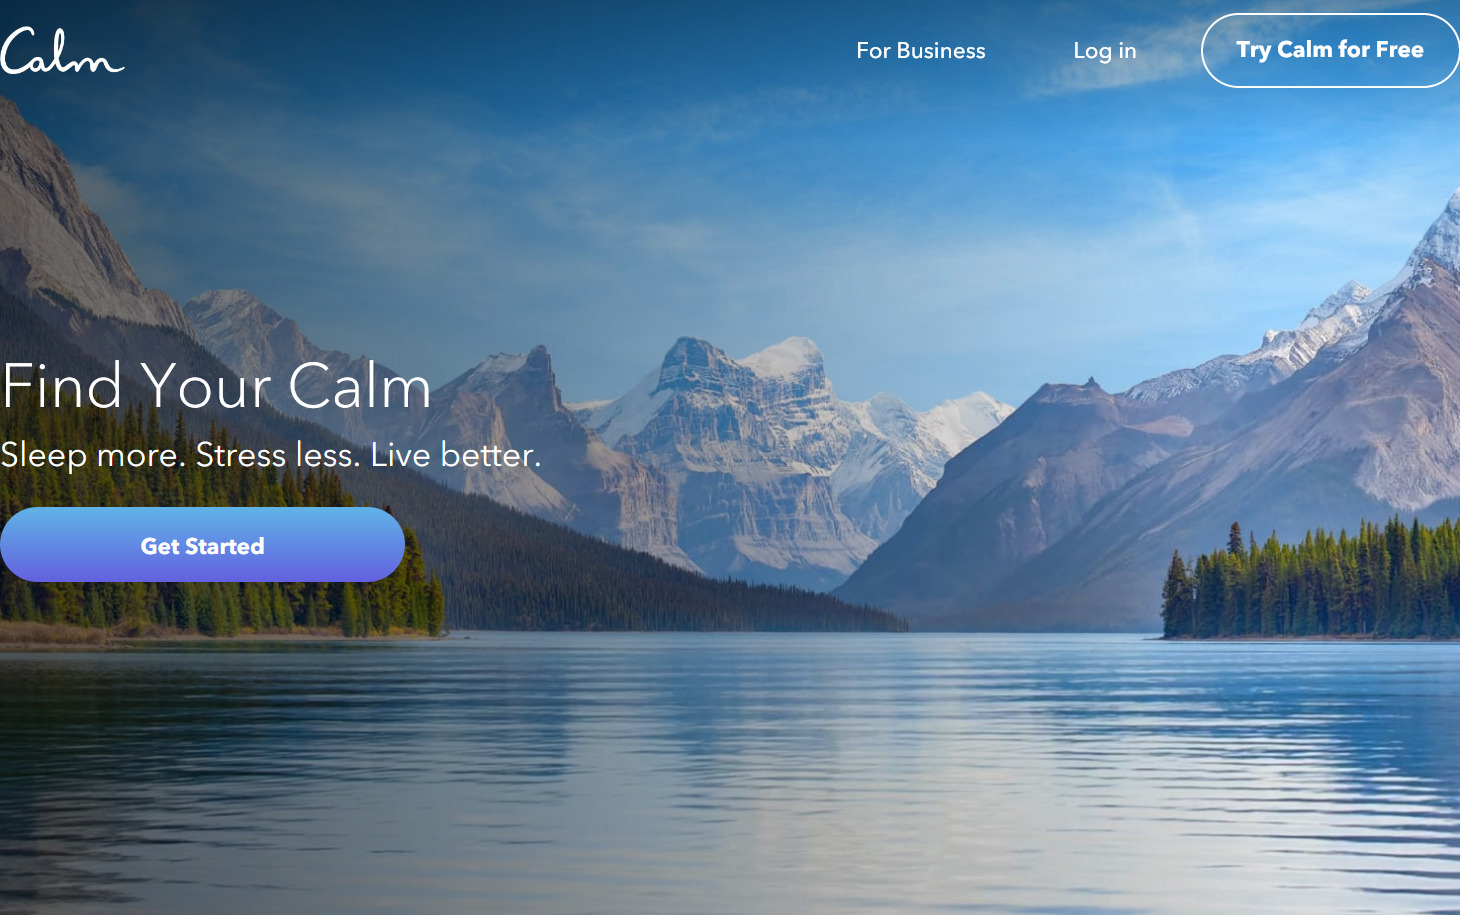 Find detailed information about Calm